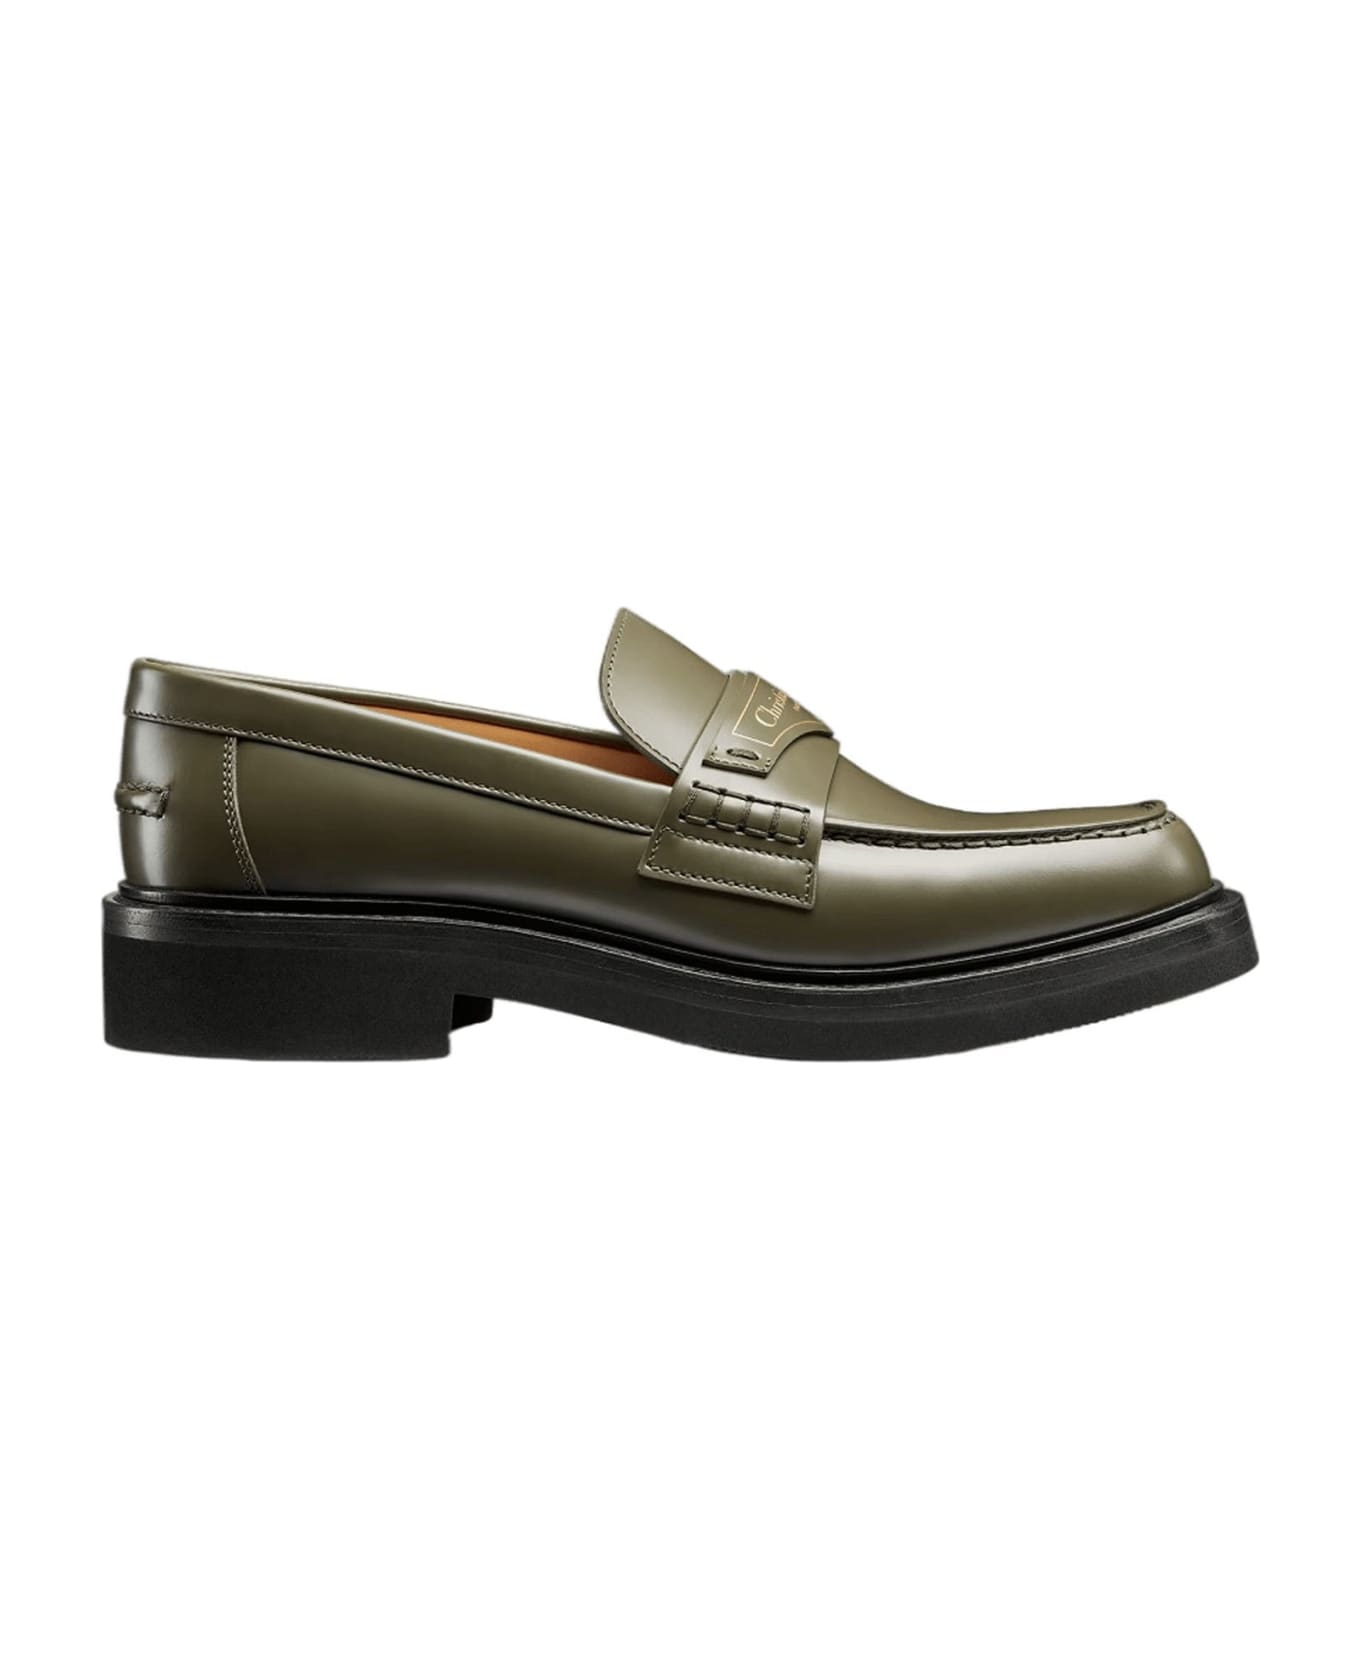 Dior Leather Loafers - Green フラットシューズ